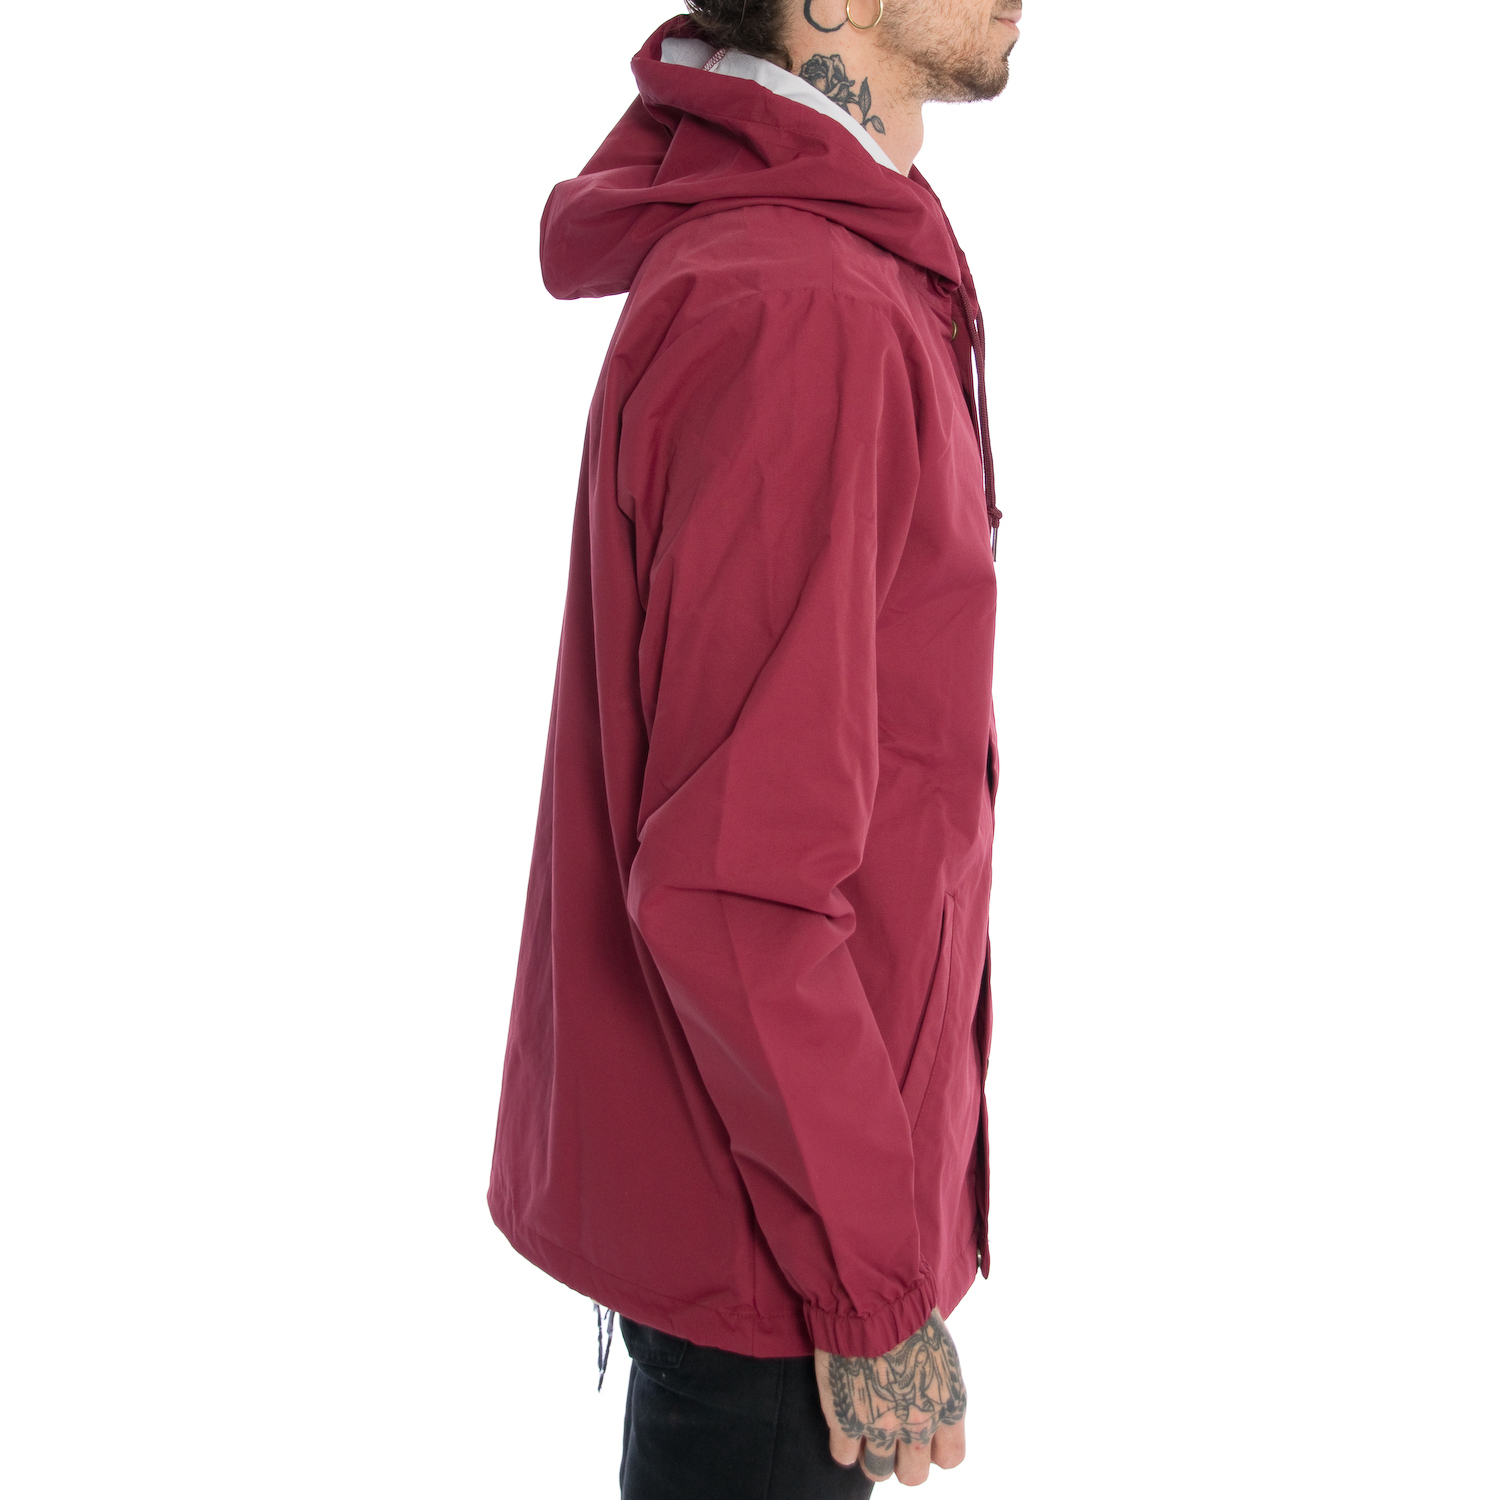 The Hooded Coach Jacket — PAPER ROOT